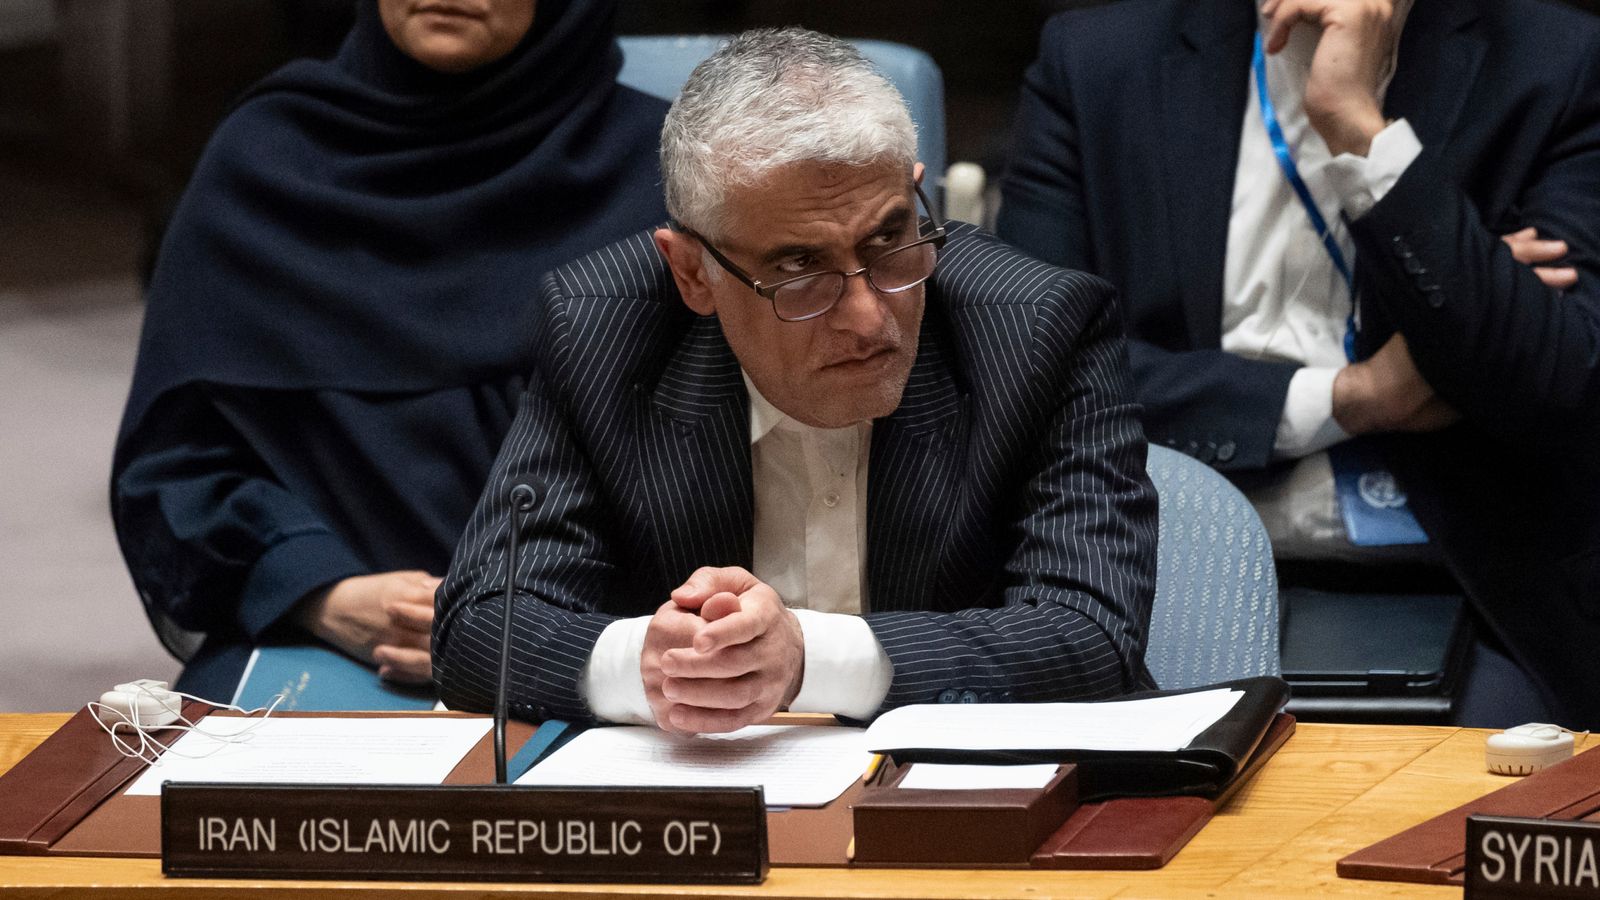 Iran\'s Ambassador to the UN responds to Israel\'s promise of significant response after weekend attack